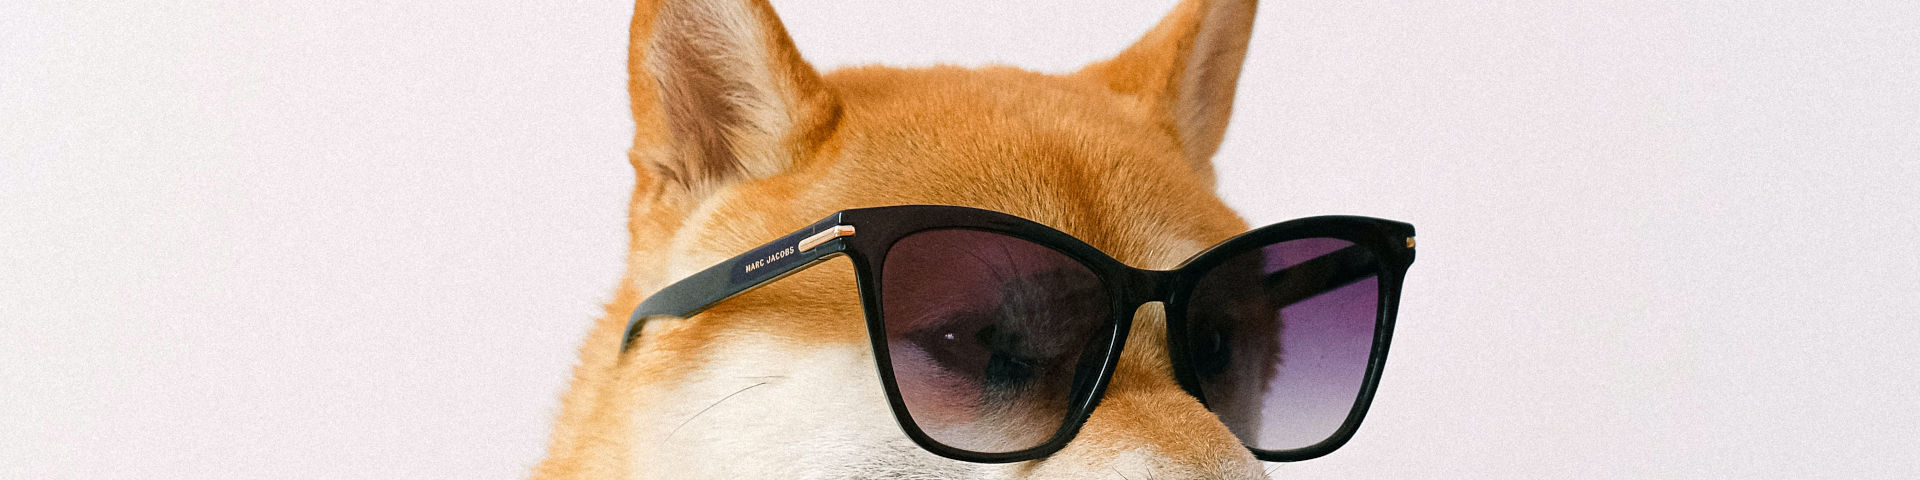 Can DOGE reach $1?